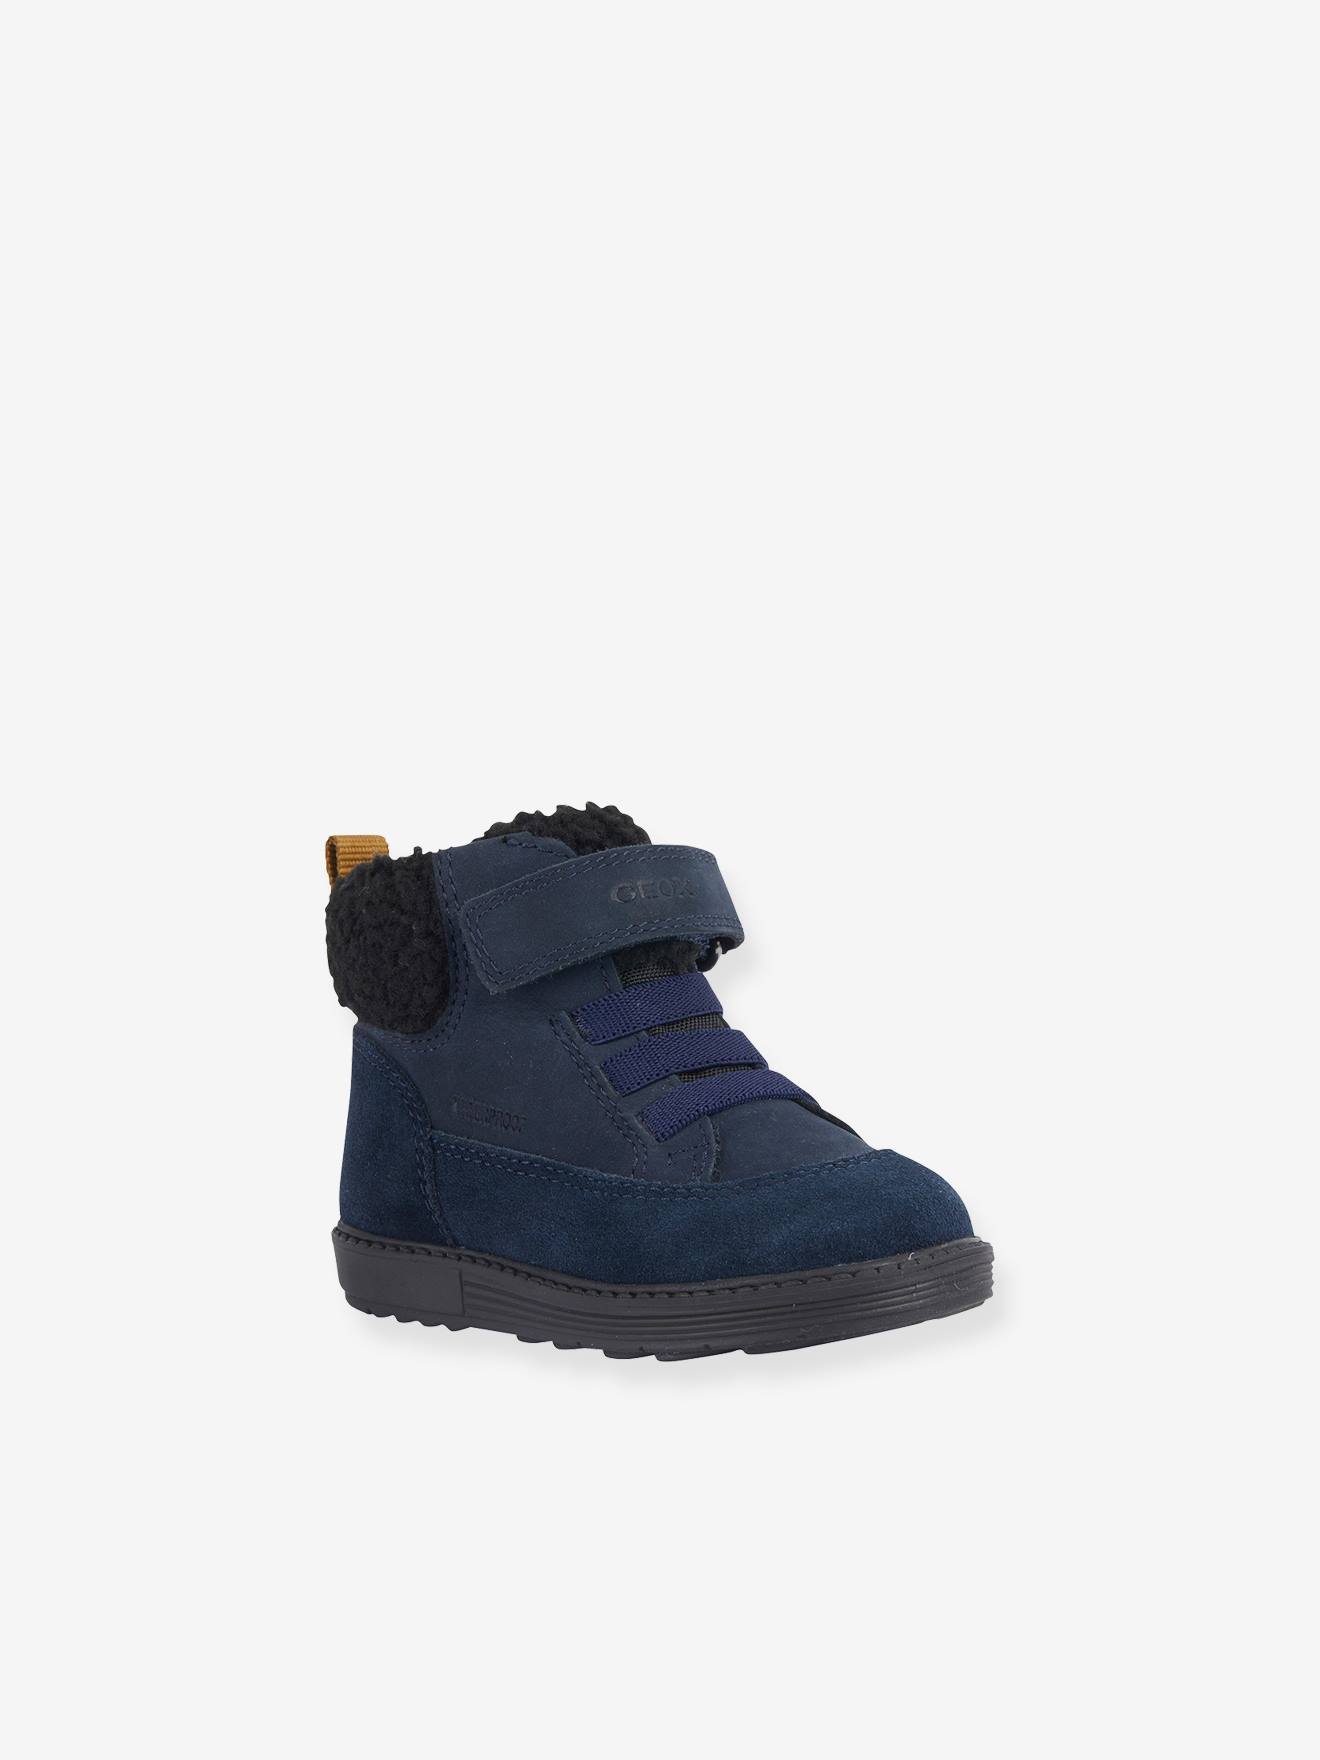 Ankle Boots for Babies, B Hynde Boy WPF by GEOX(r) navy blue